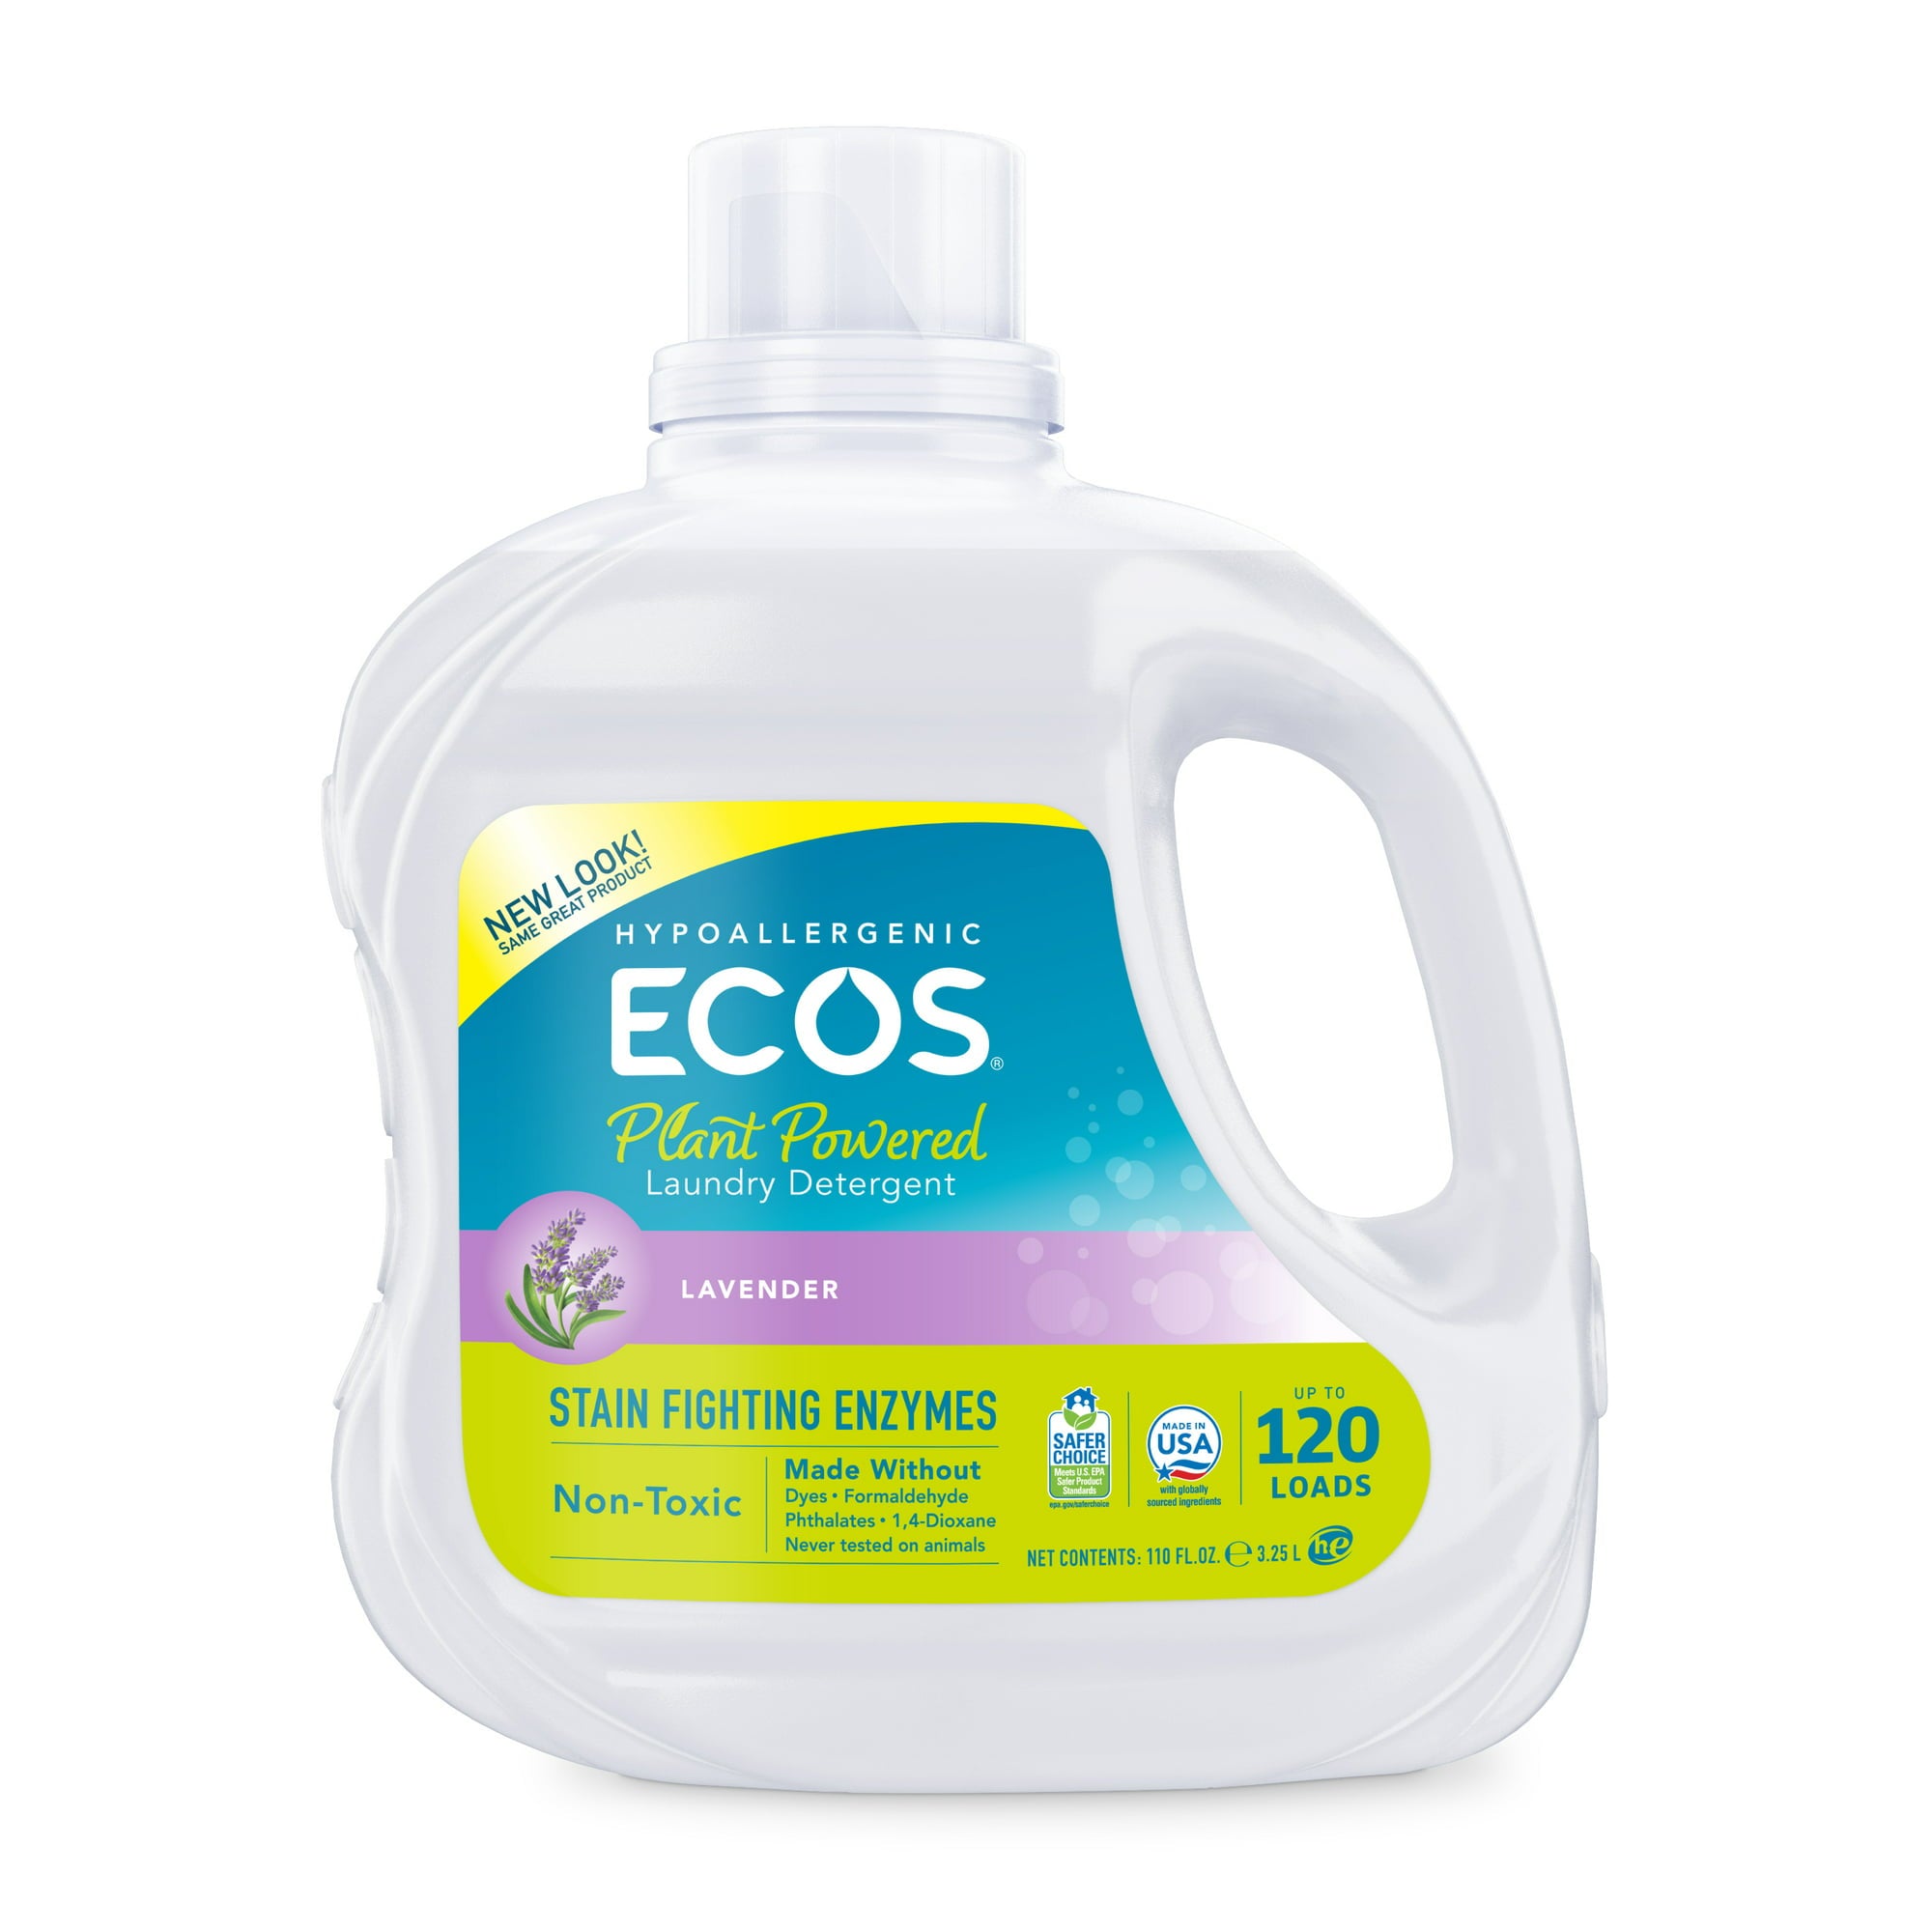 ECOS Plant Powered Liquid Laundry Detergent with Stain Fighting Enzymes, Lavender, 120 Loads, 110 Ounce, Hypoallergenic for Sensitive Skin